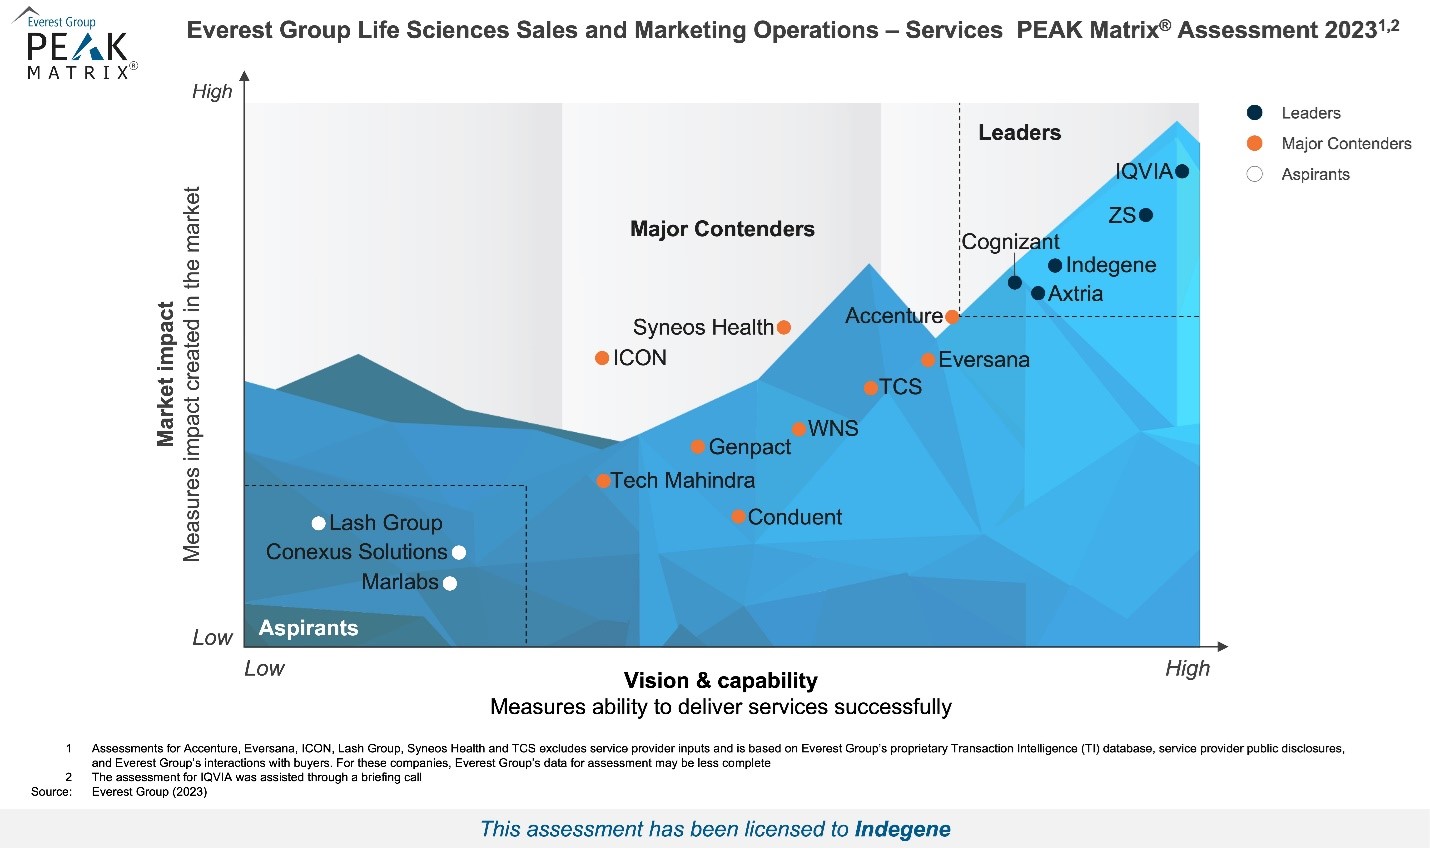 Everest Group recognizes Indegene as a Leader in its Life Sciences Sales and Marketing Operations PEAK Matrix® Assessment 2023